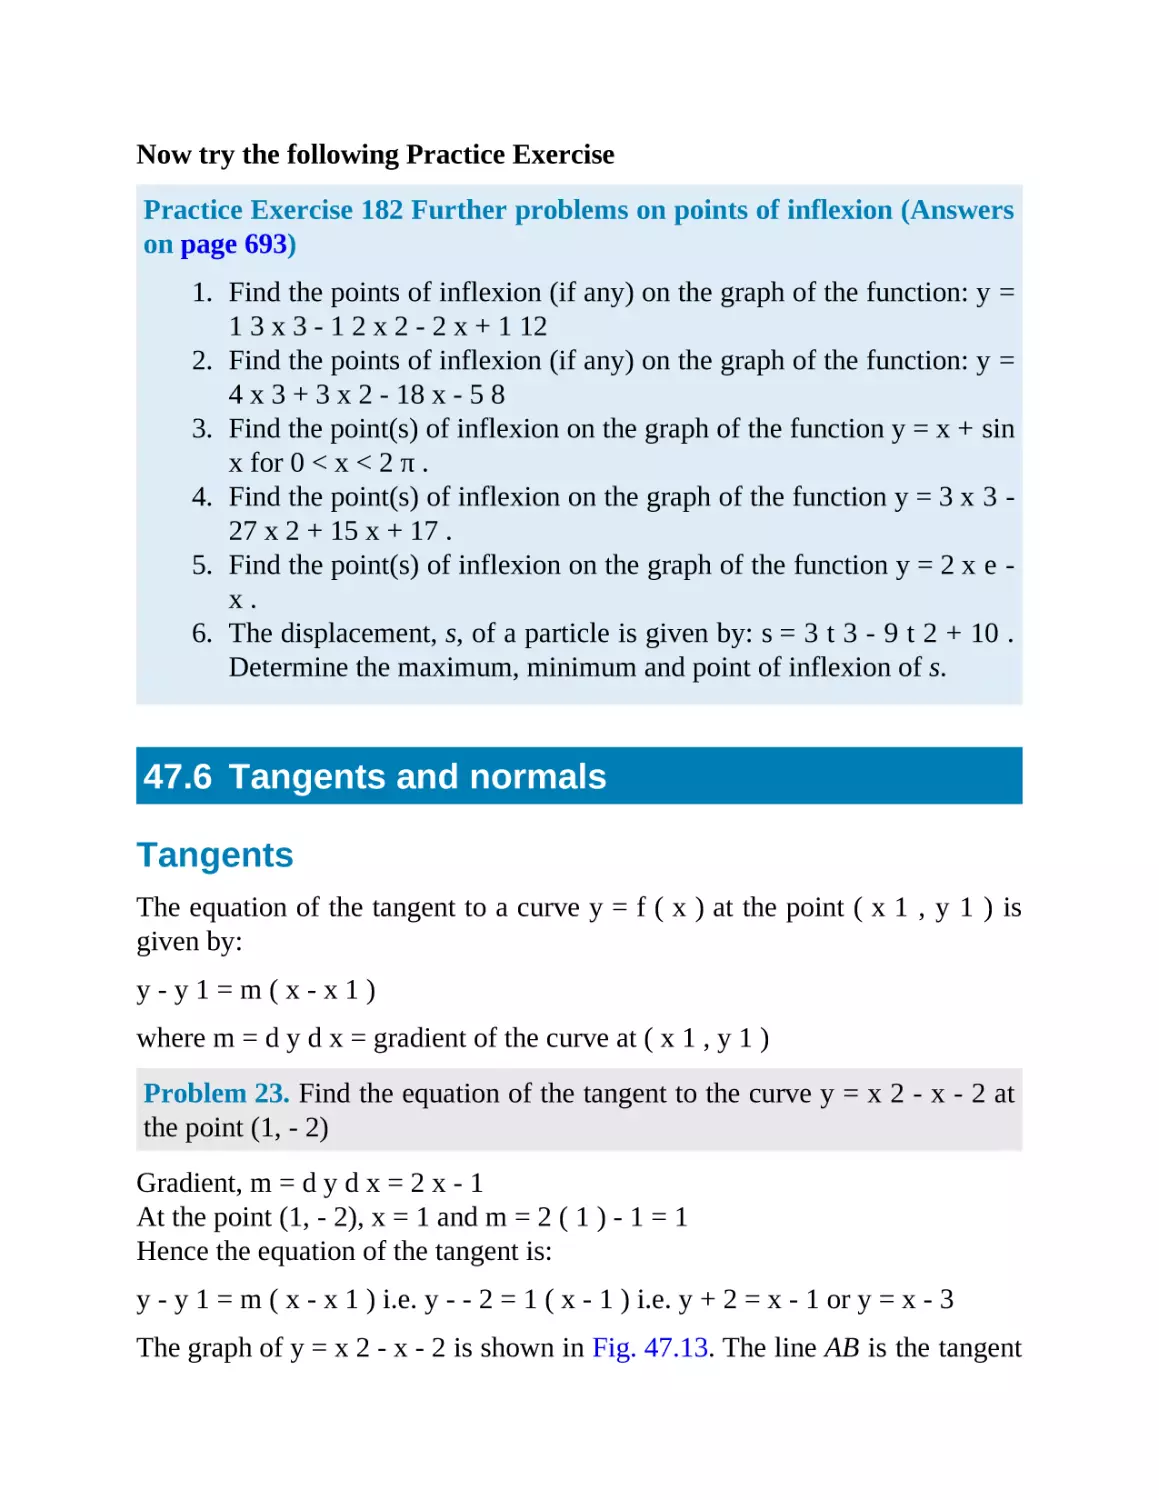 47.6 Tangents and normals